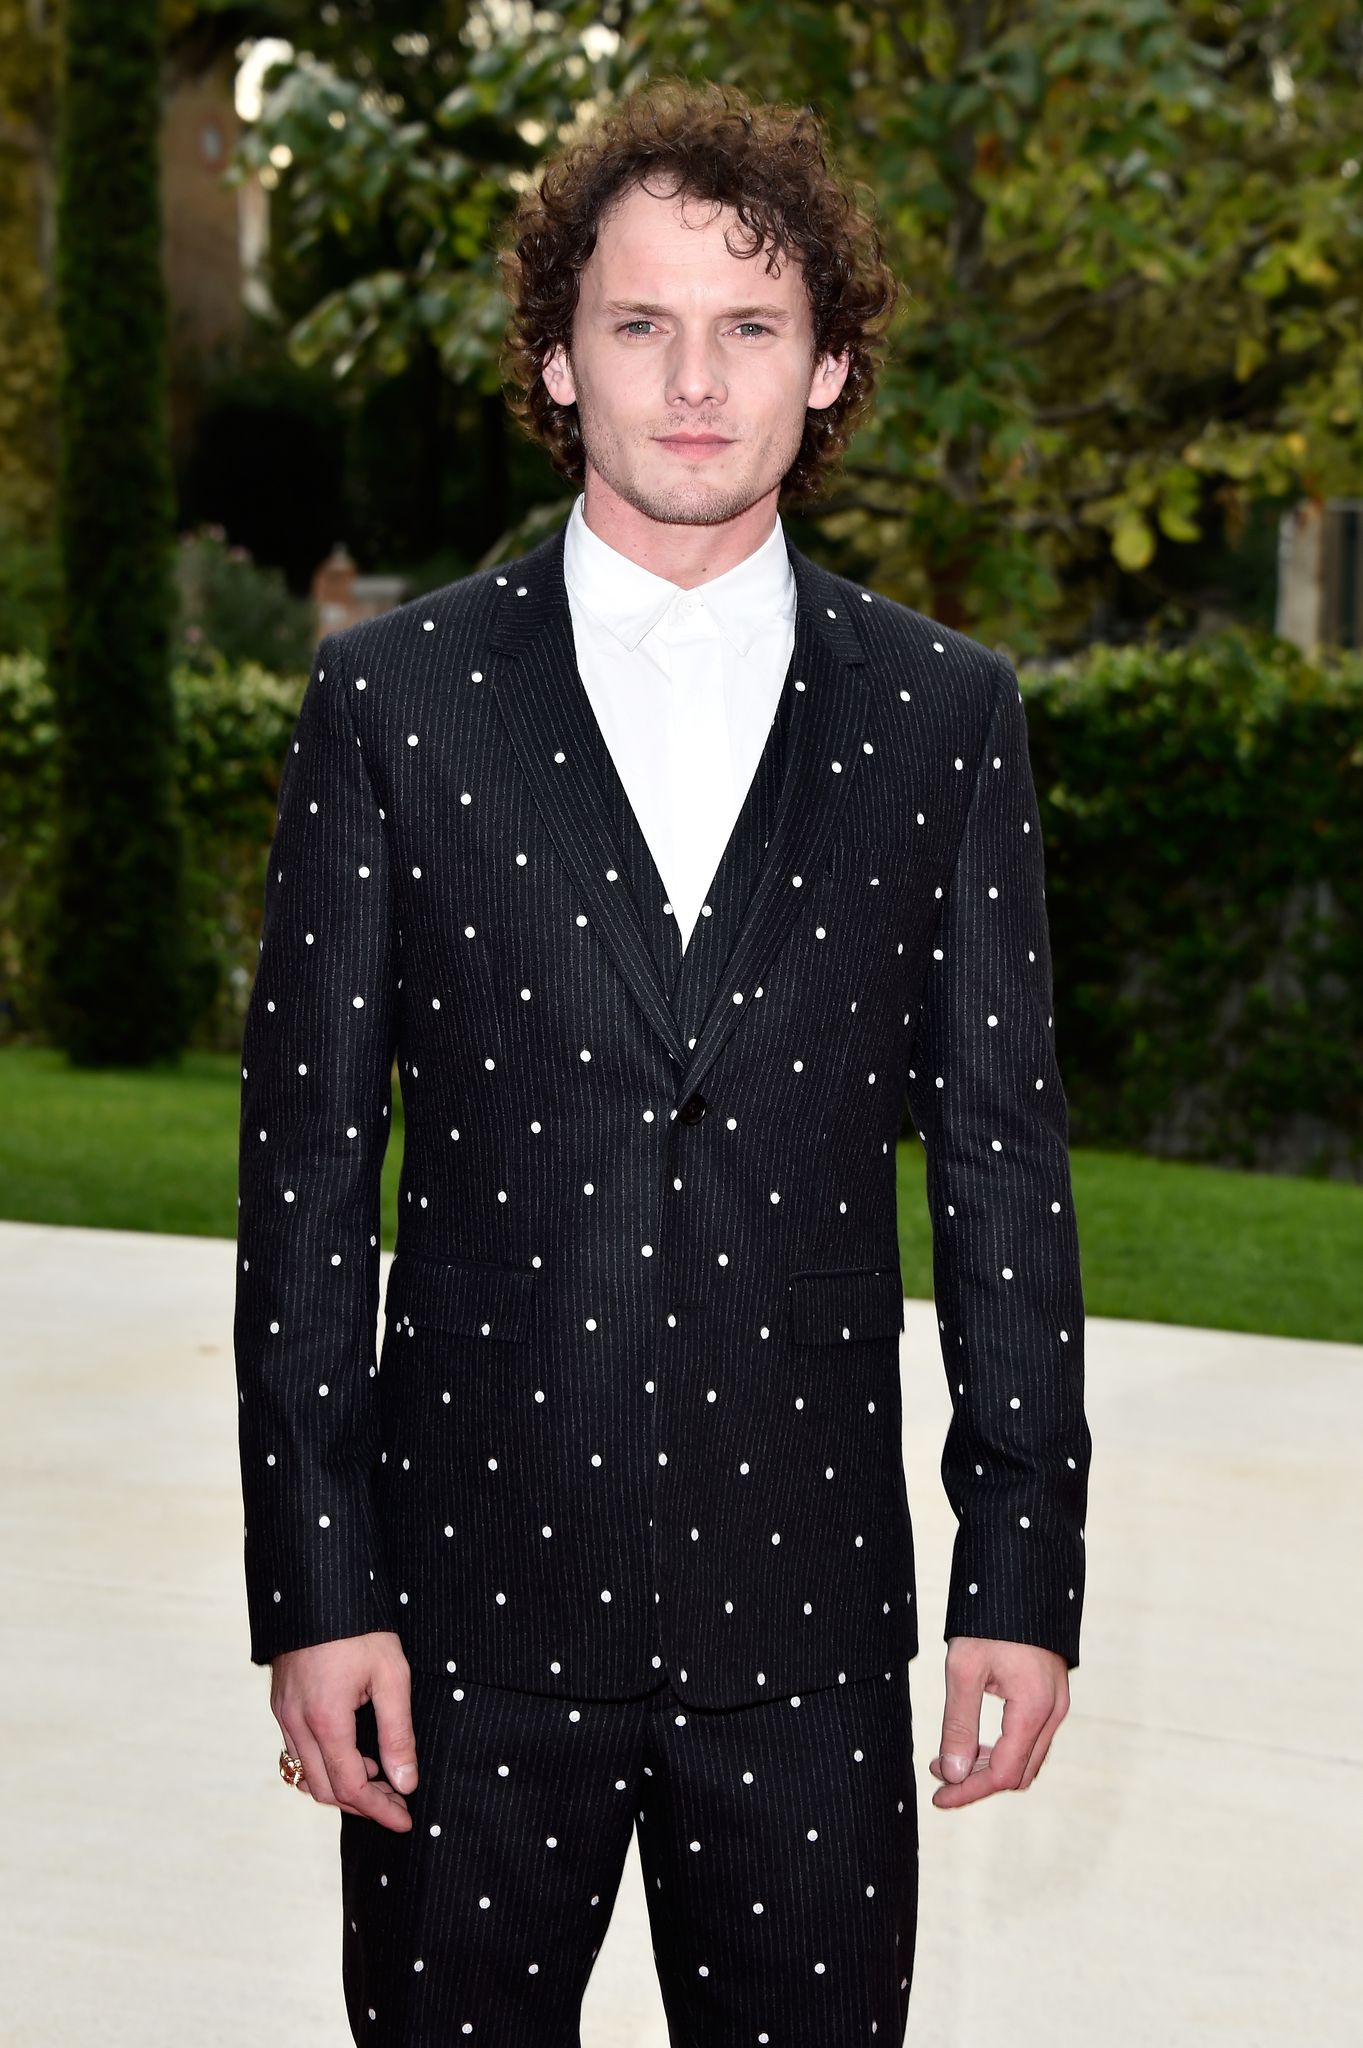  Anton Yelchin at the premiere of "Cymbeline" in 2014 in Venice, Italy | Source: Getty Images